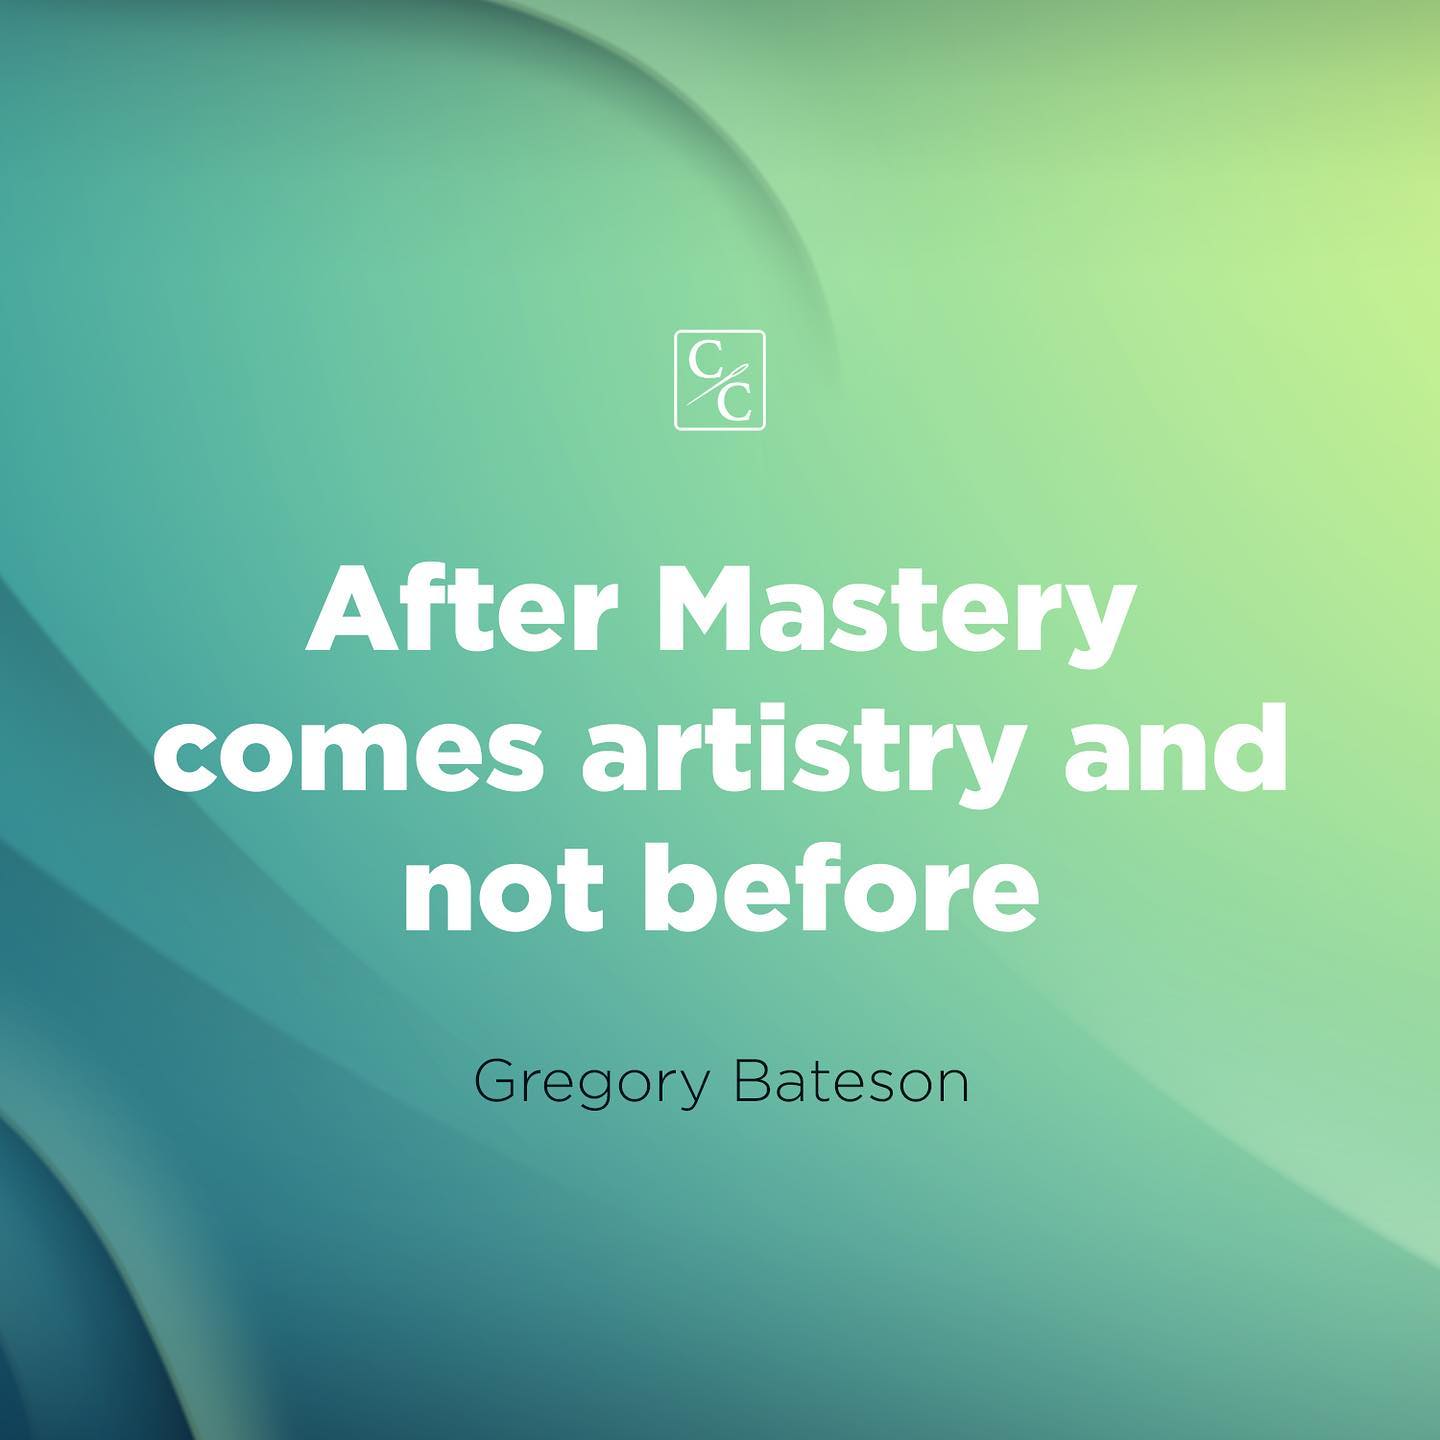 After Mastery comes artistry and not before